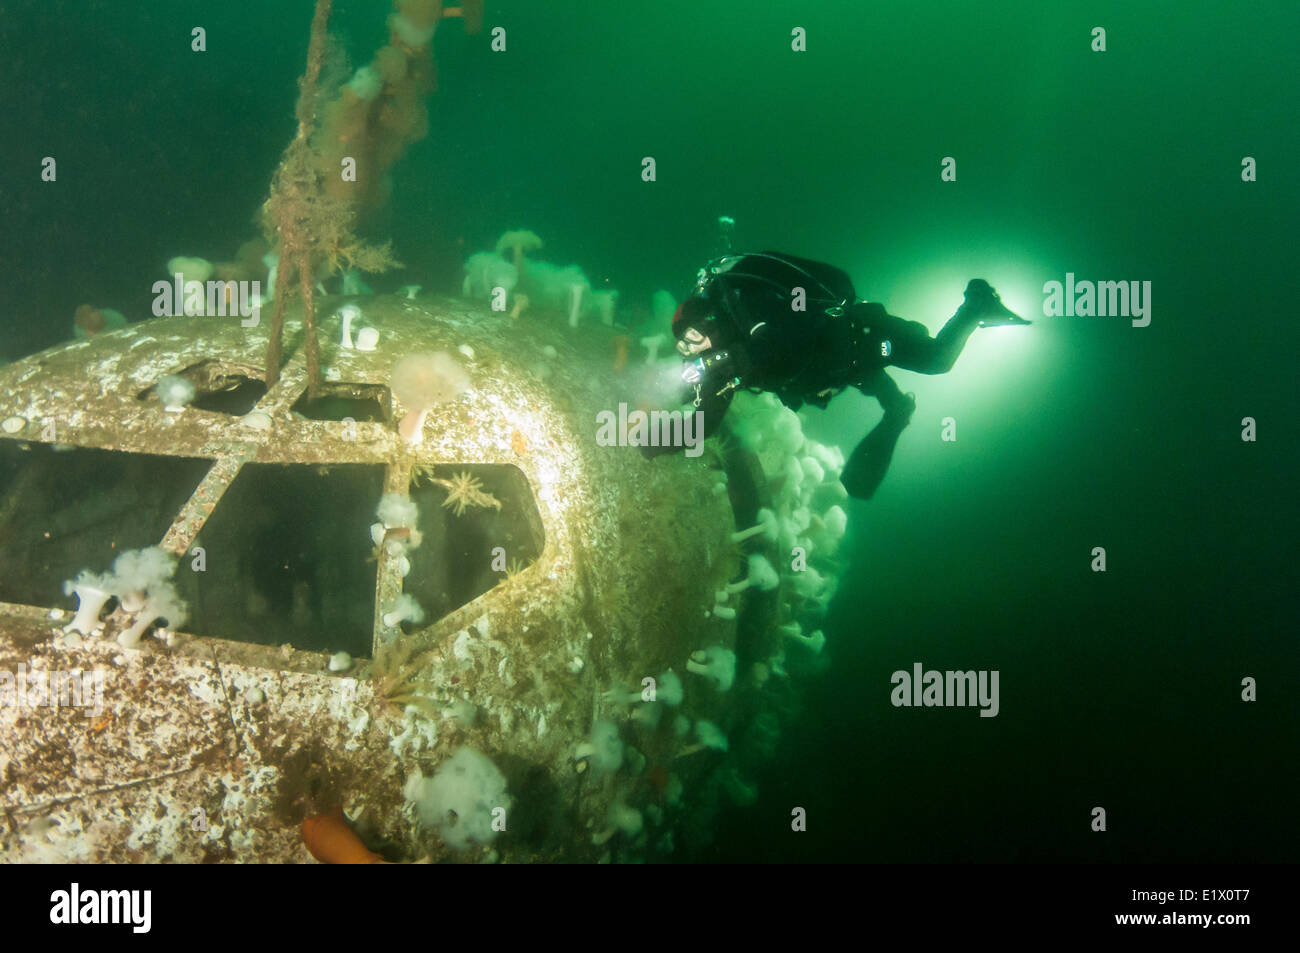 A scuba diver inspects the artificial wreck of a 737 Air Canada airplane, sunk near Chemainus, BC Stock Photo